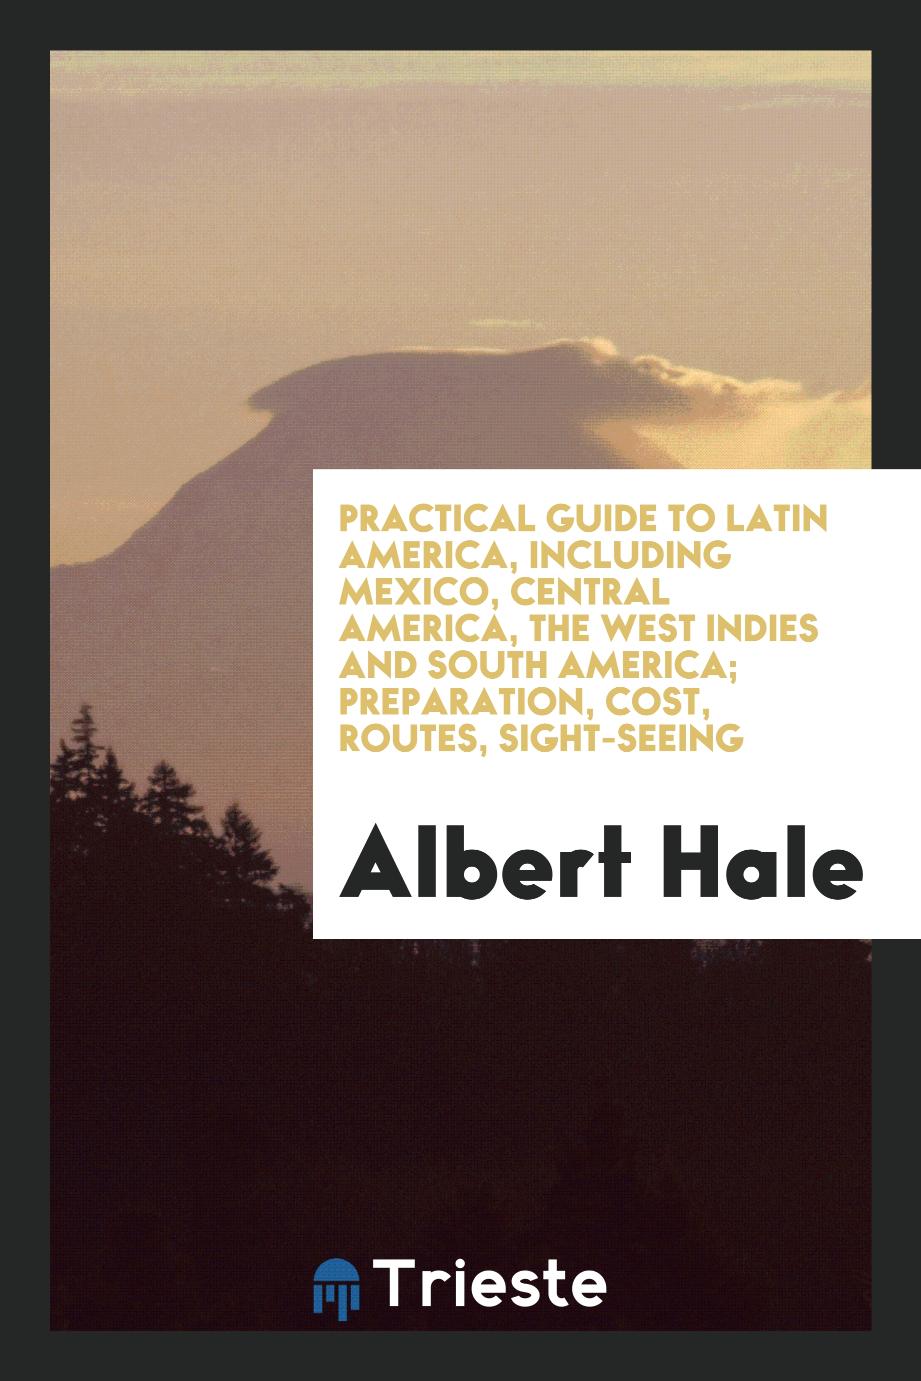 Practical guide to Latin America, including Mexico, Central America, the West Indies and South America; preparation, cost, routes, sight-seeing